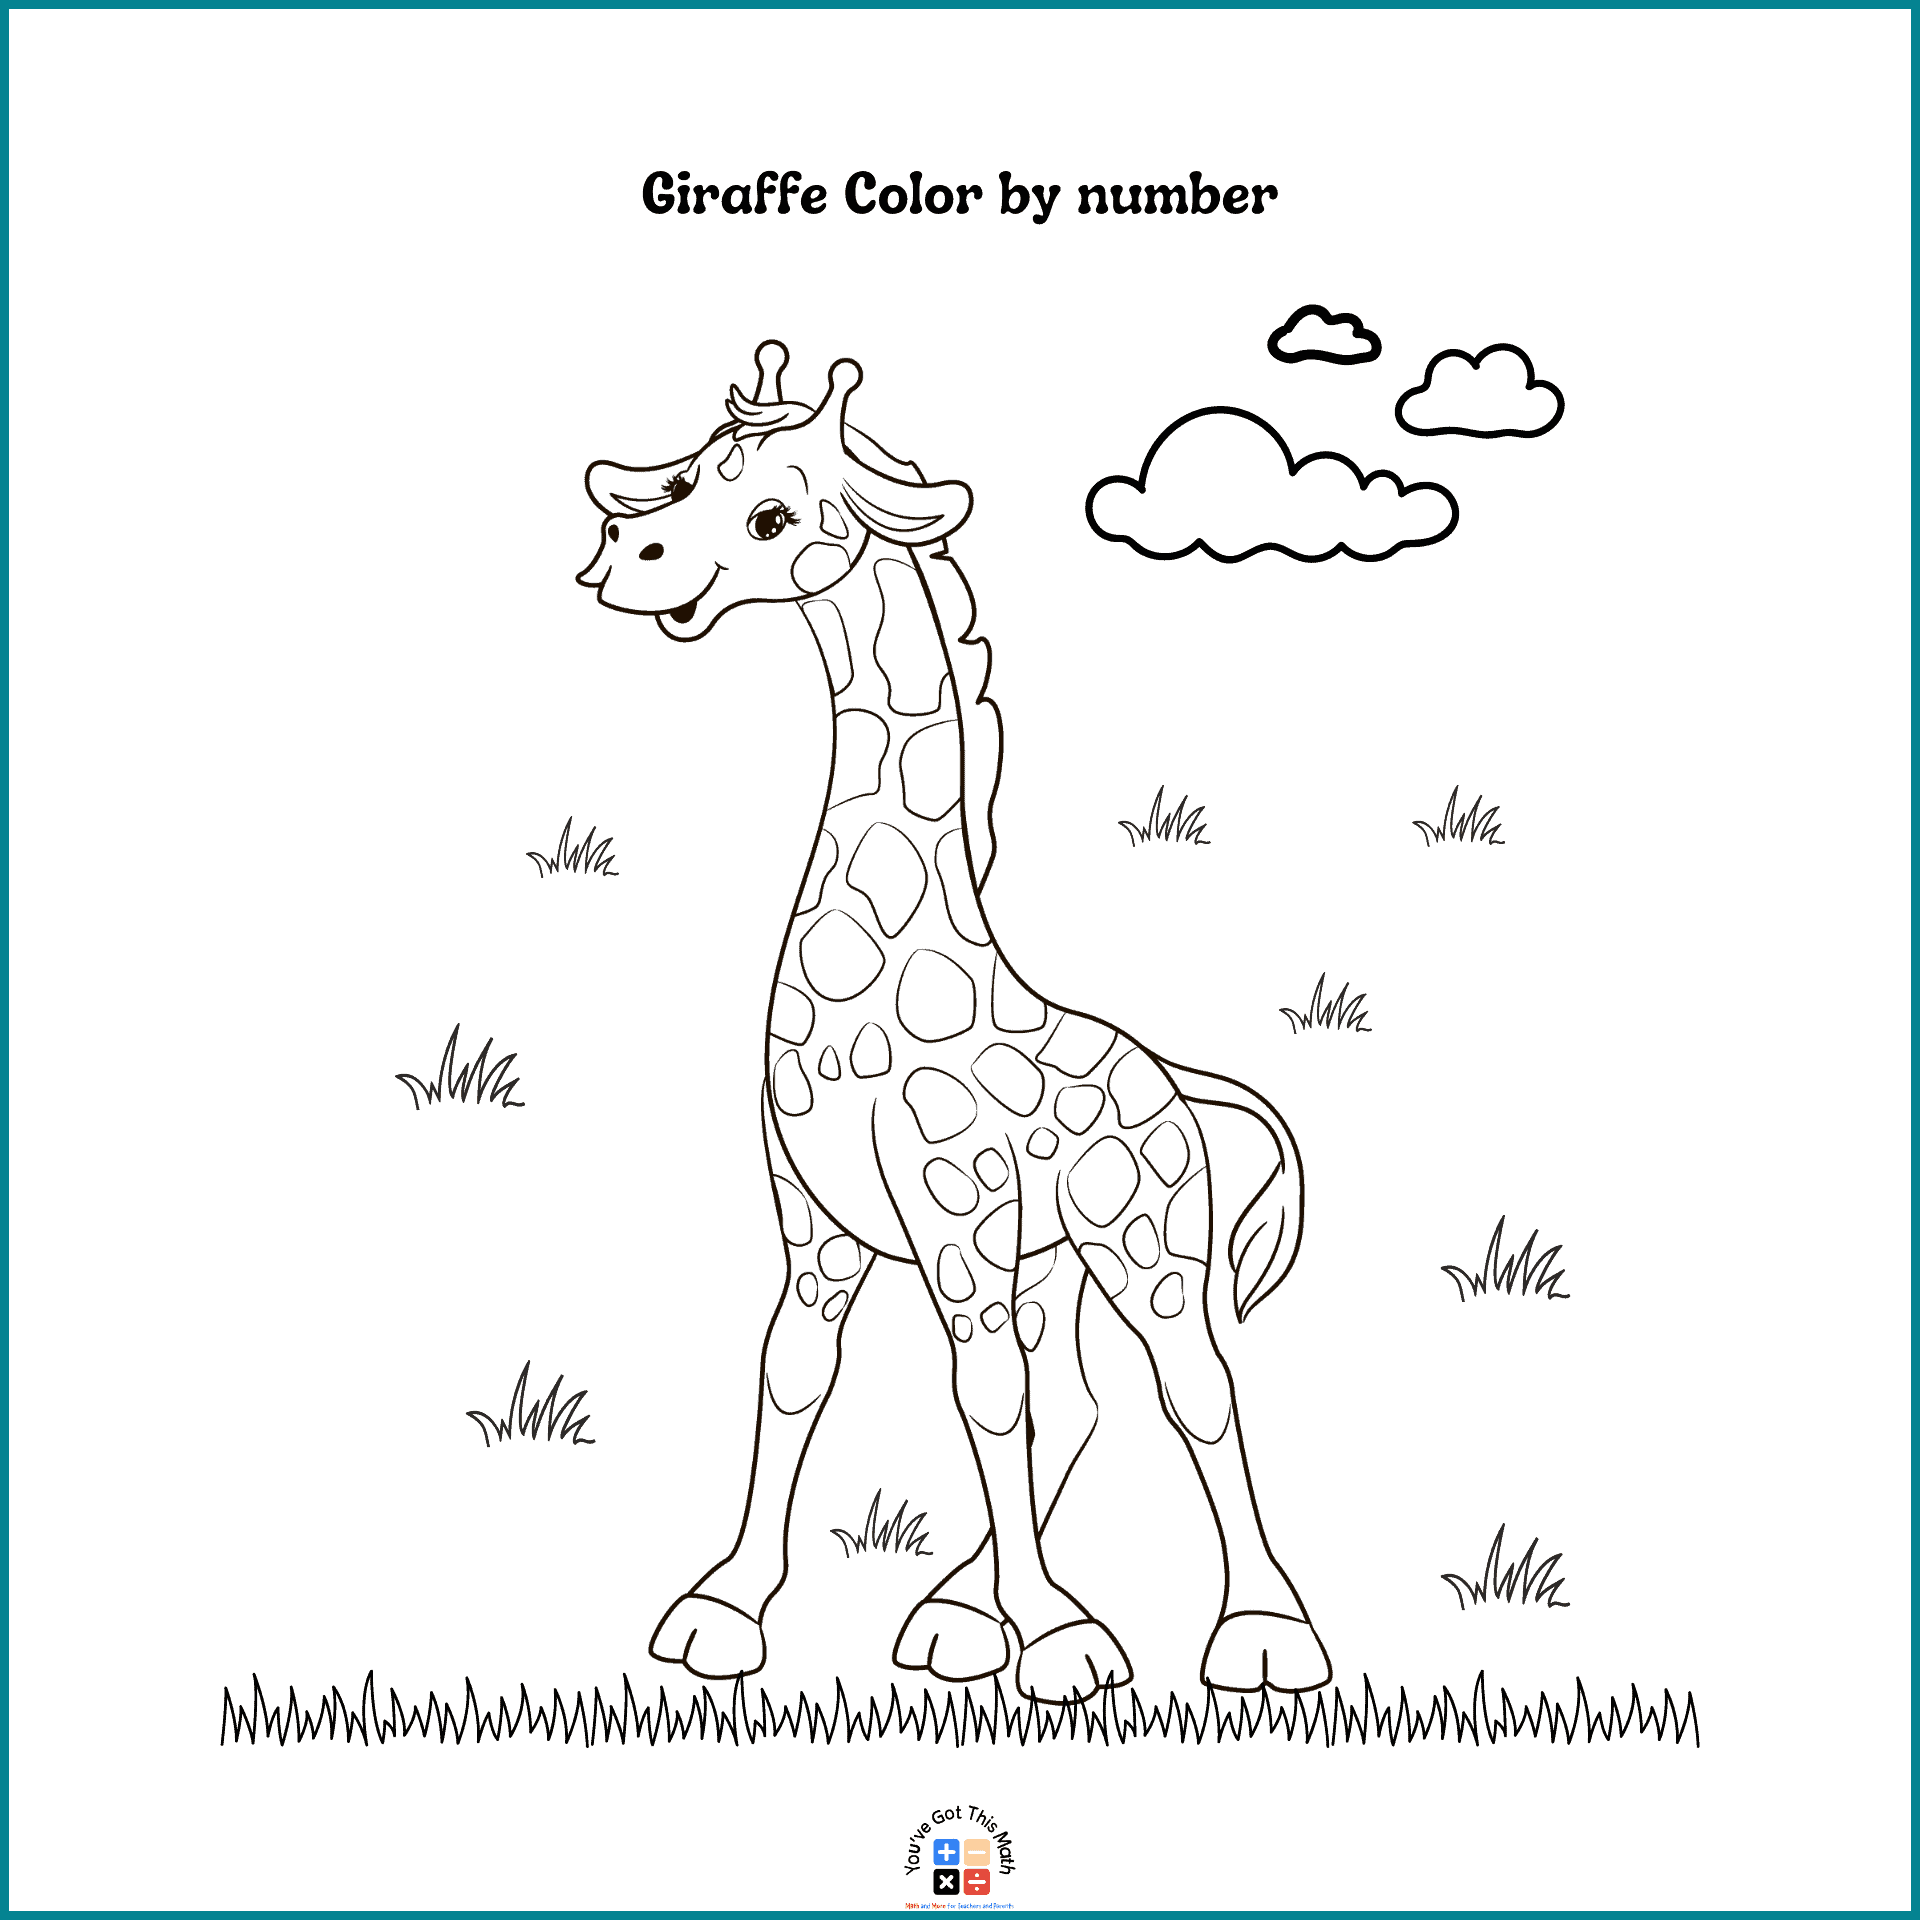 giraffe color by number overview